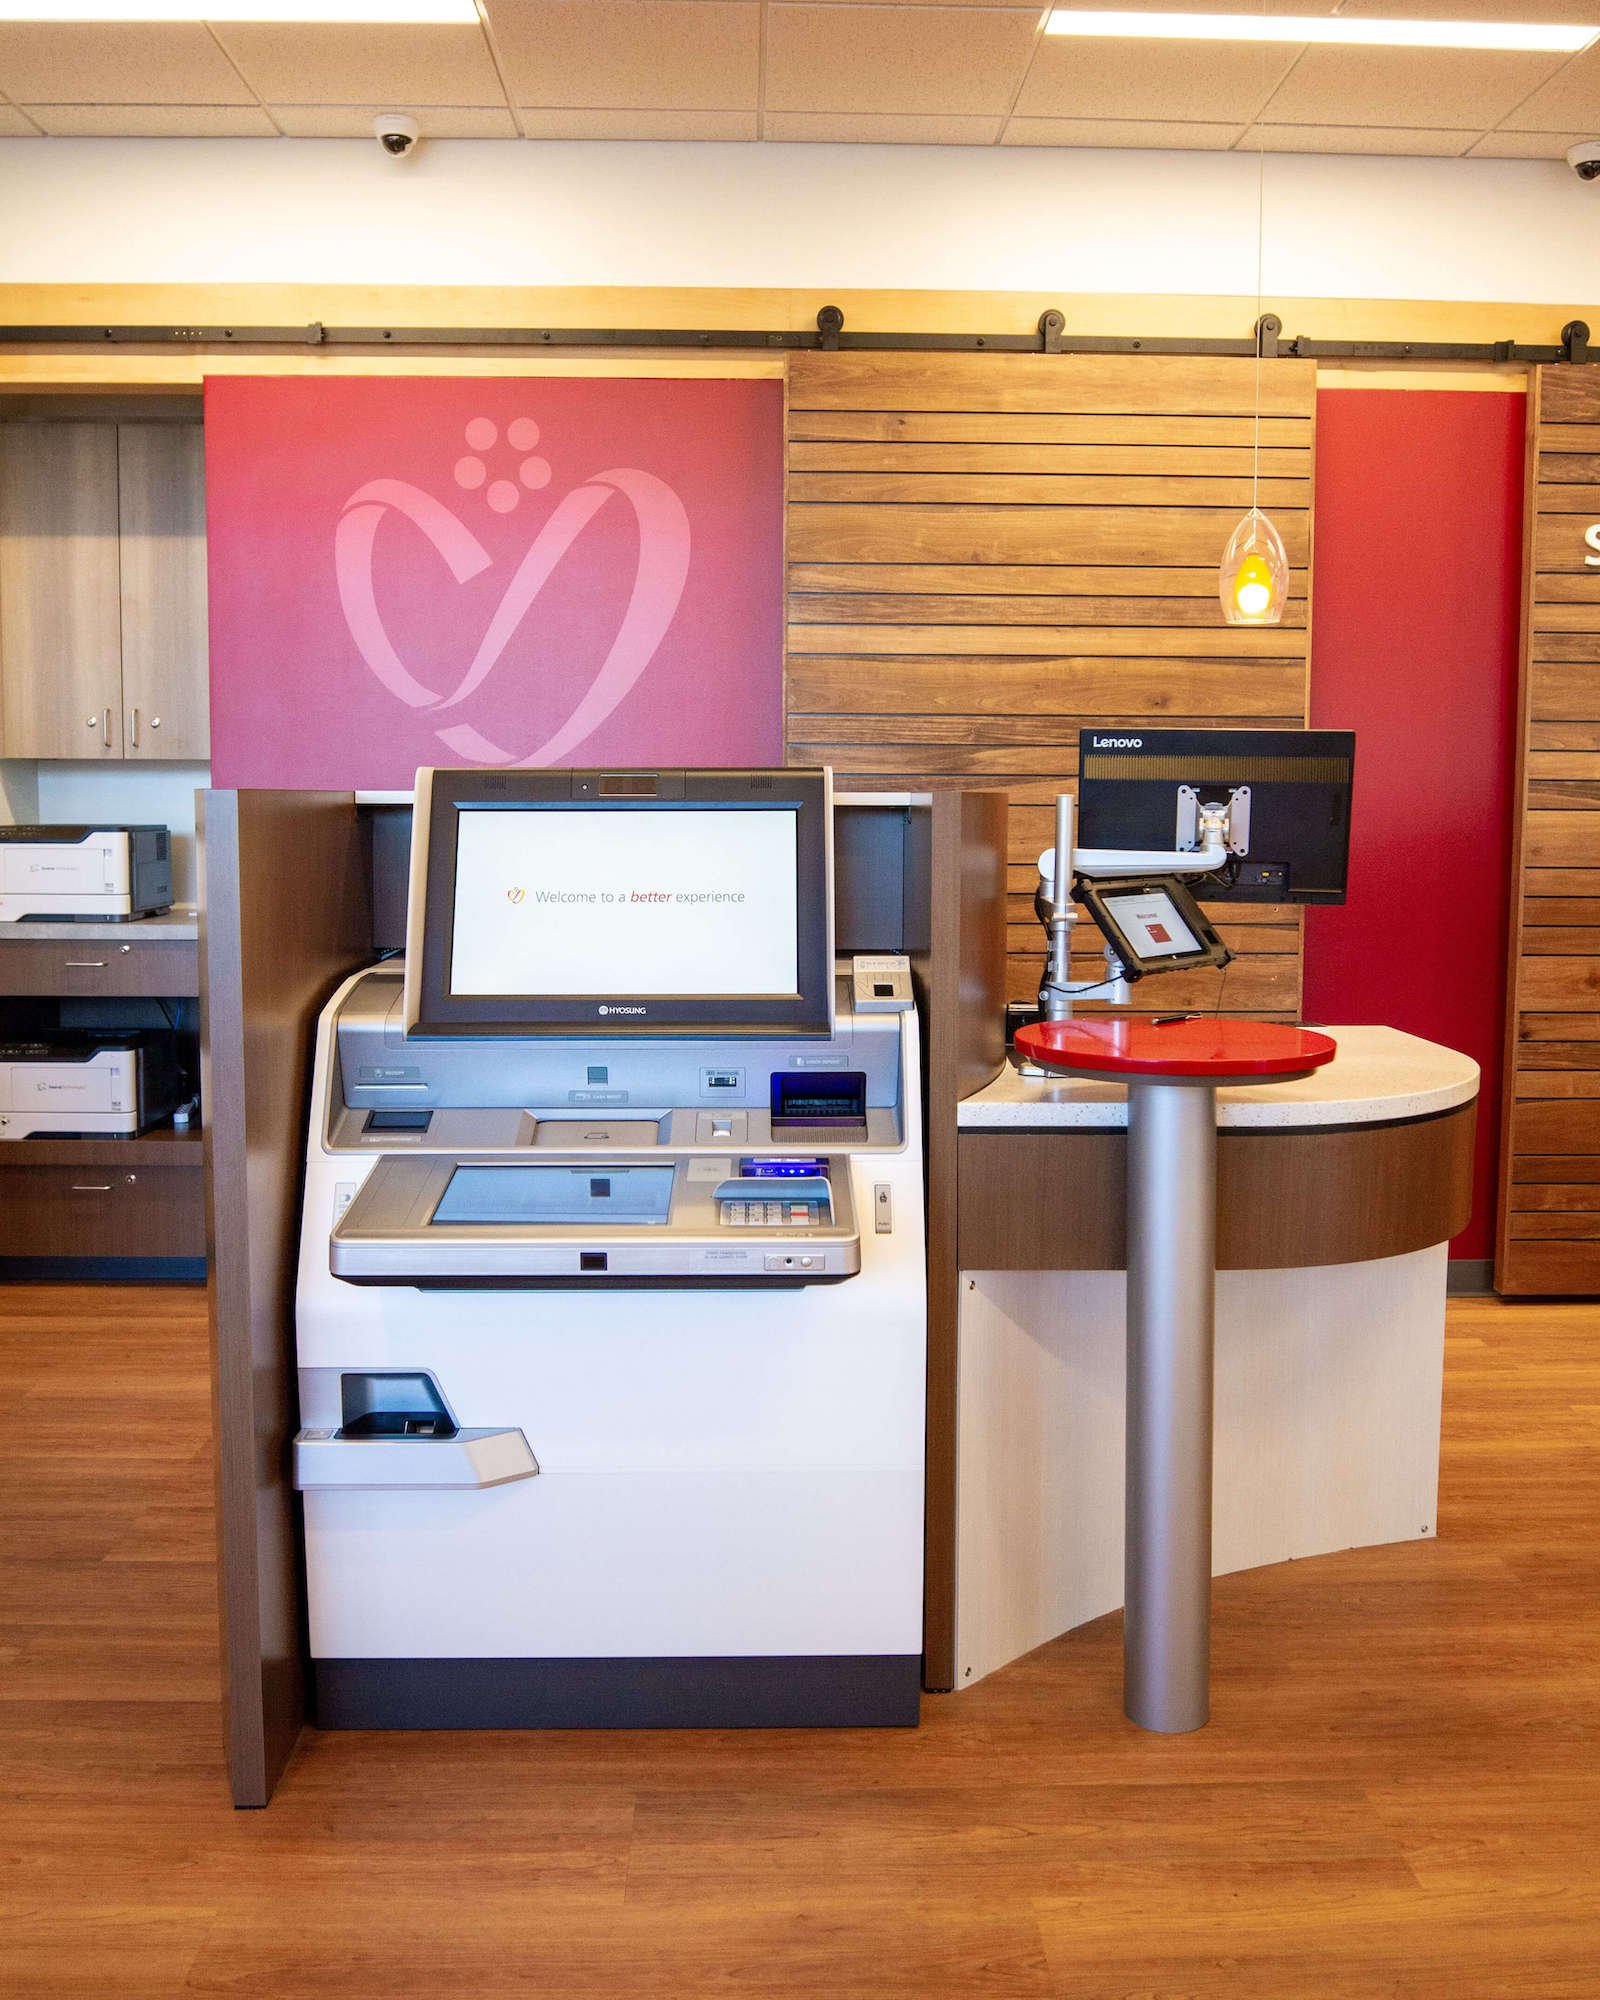 A credit union interior featuring a self-service kiosk with a touchscreen display. Behind the kiosk is a red wall with a heart-shaped logo against a wood panel wall.